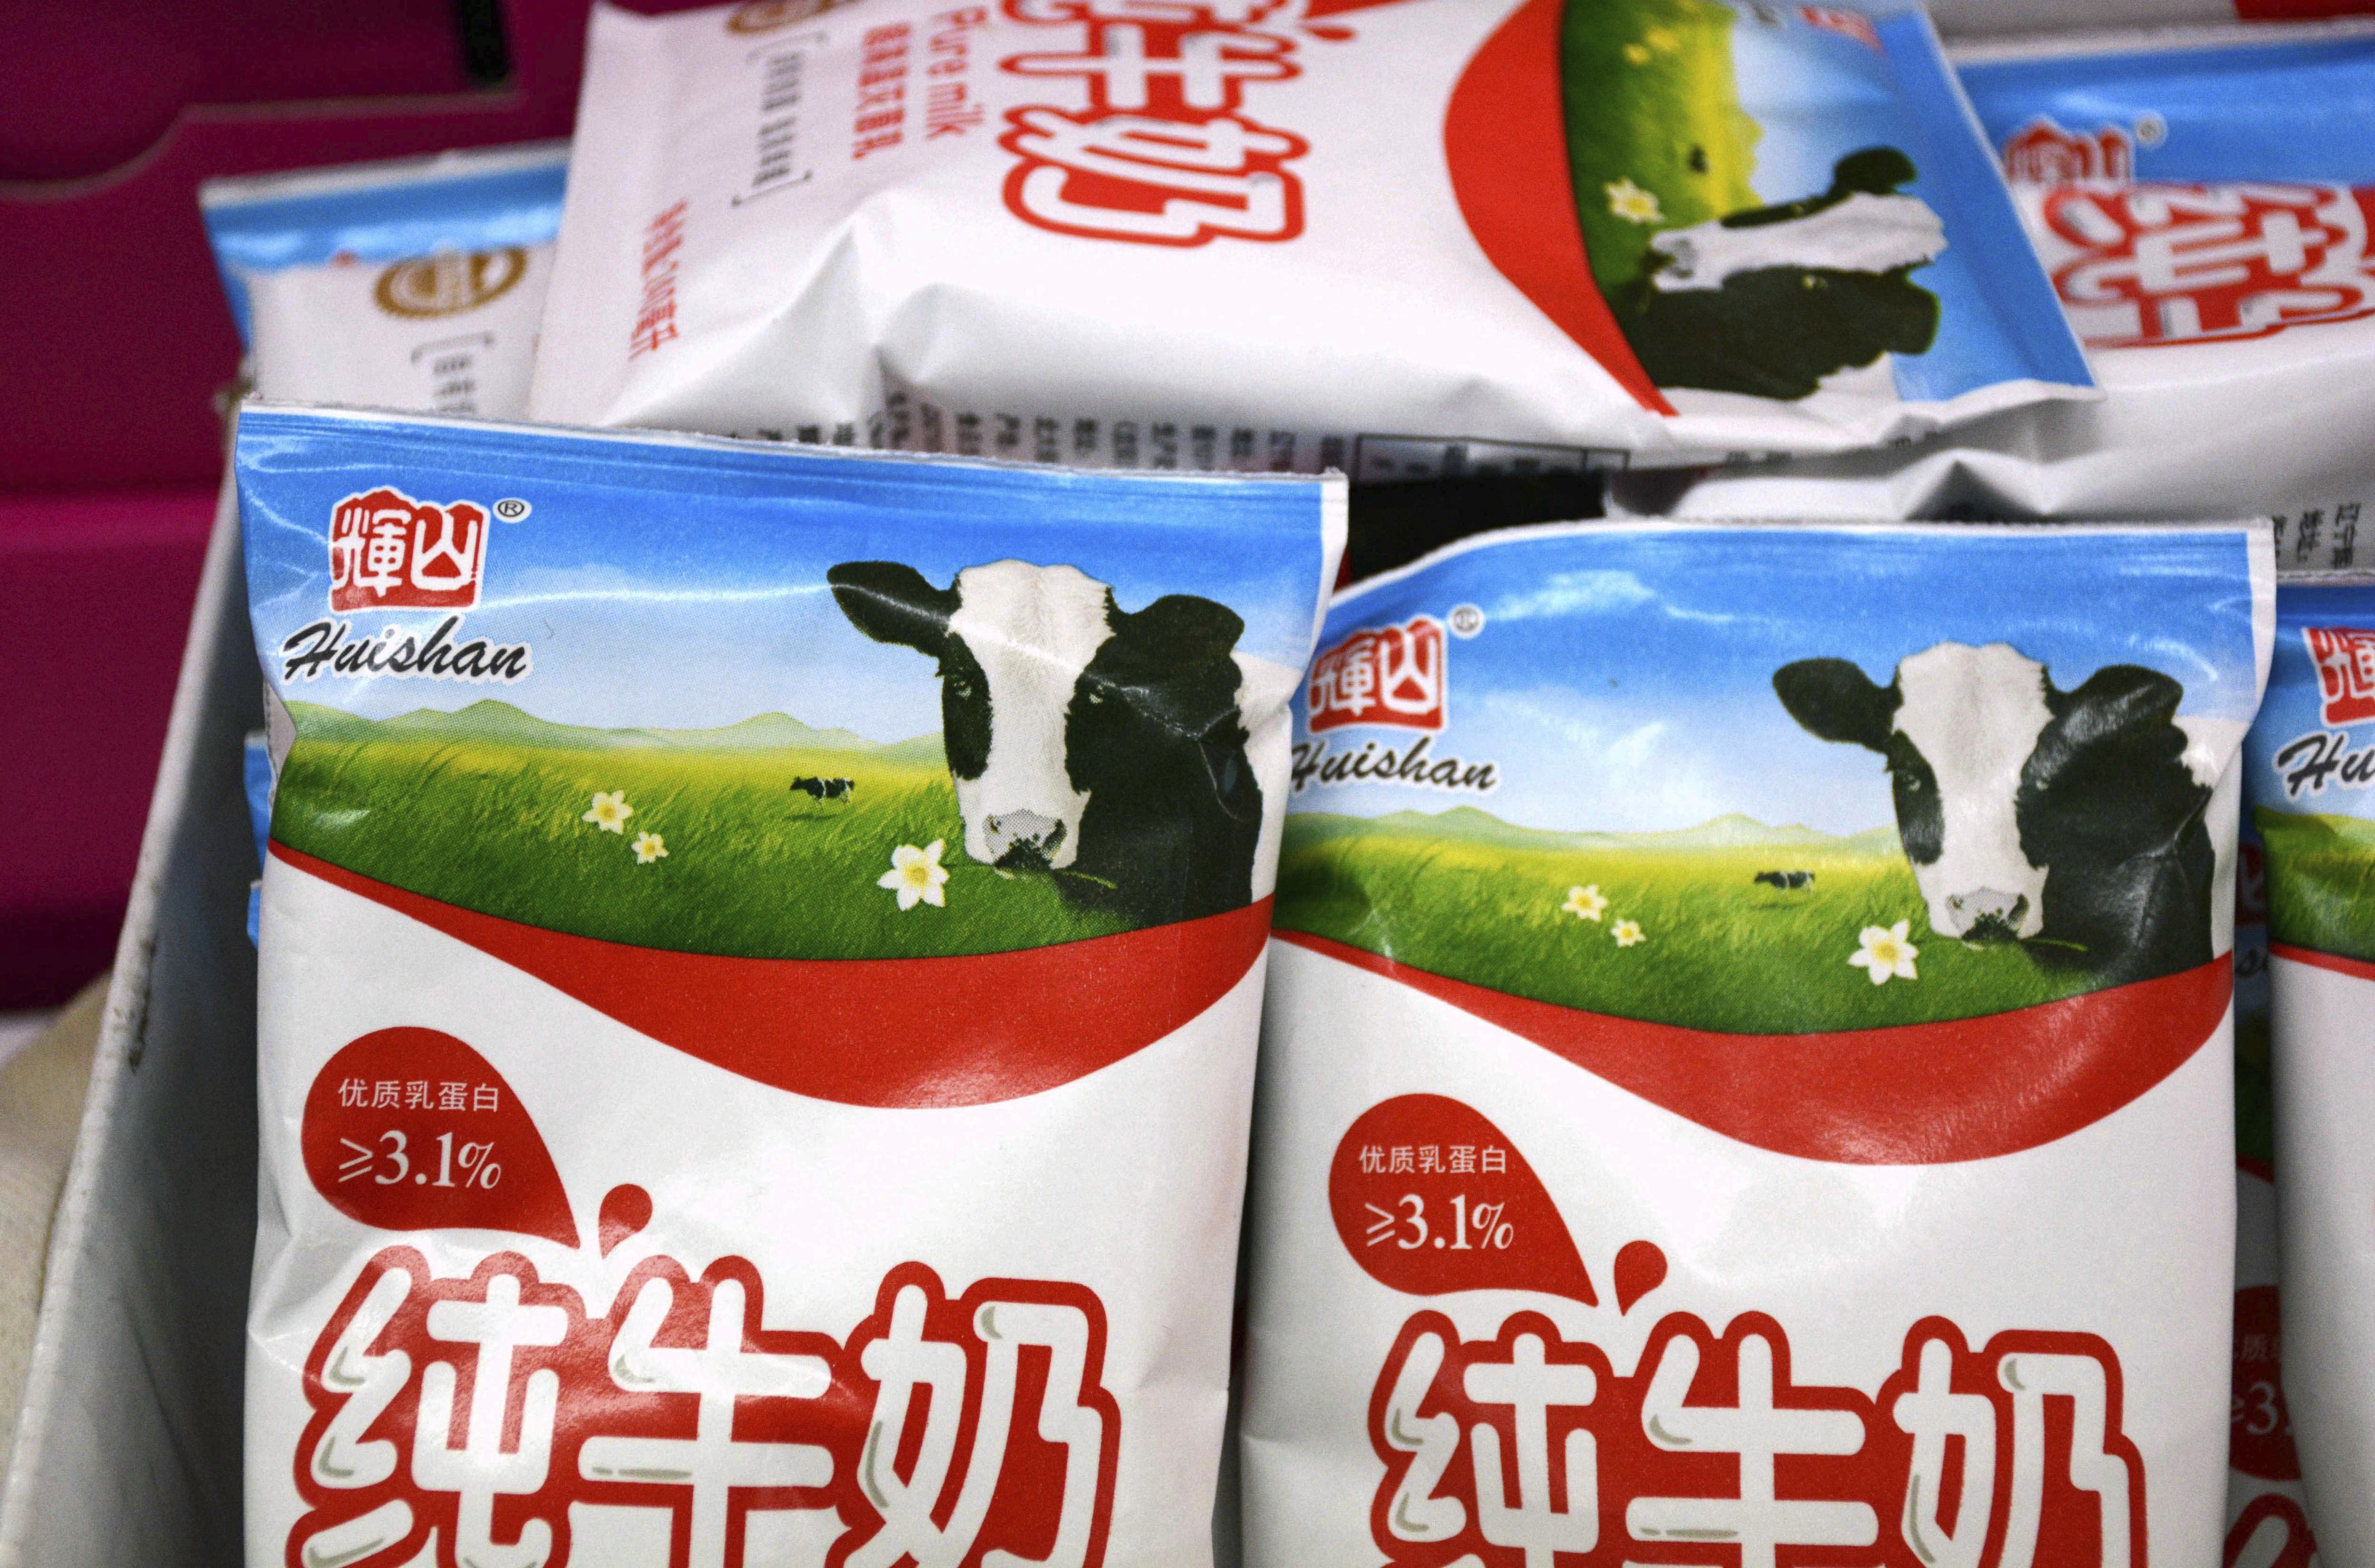 Huishan’s troubles started after a report from US short seller Muddy Waters raised concerns about the company. Photo: Chinatopix via AP